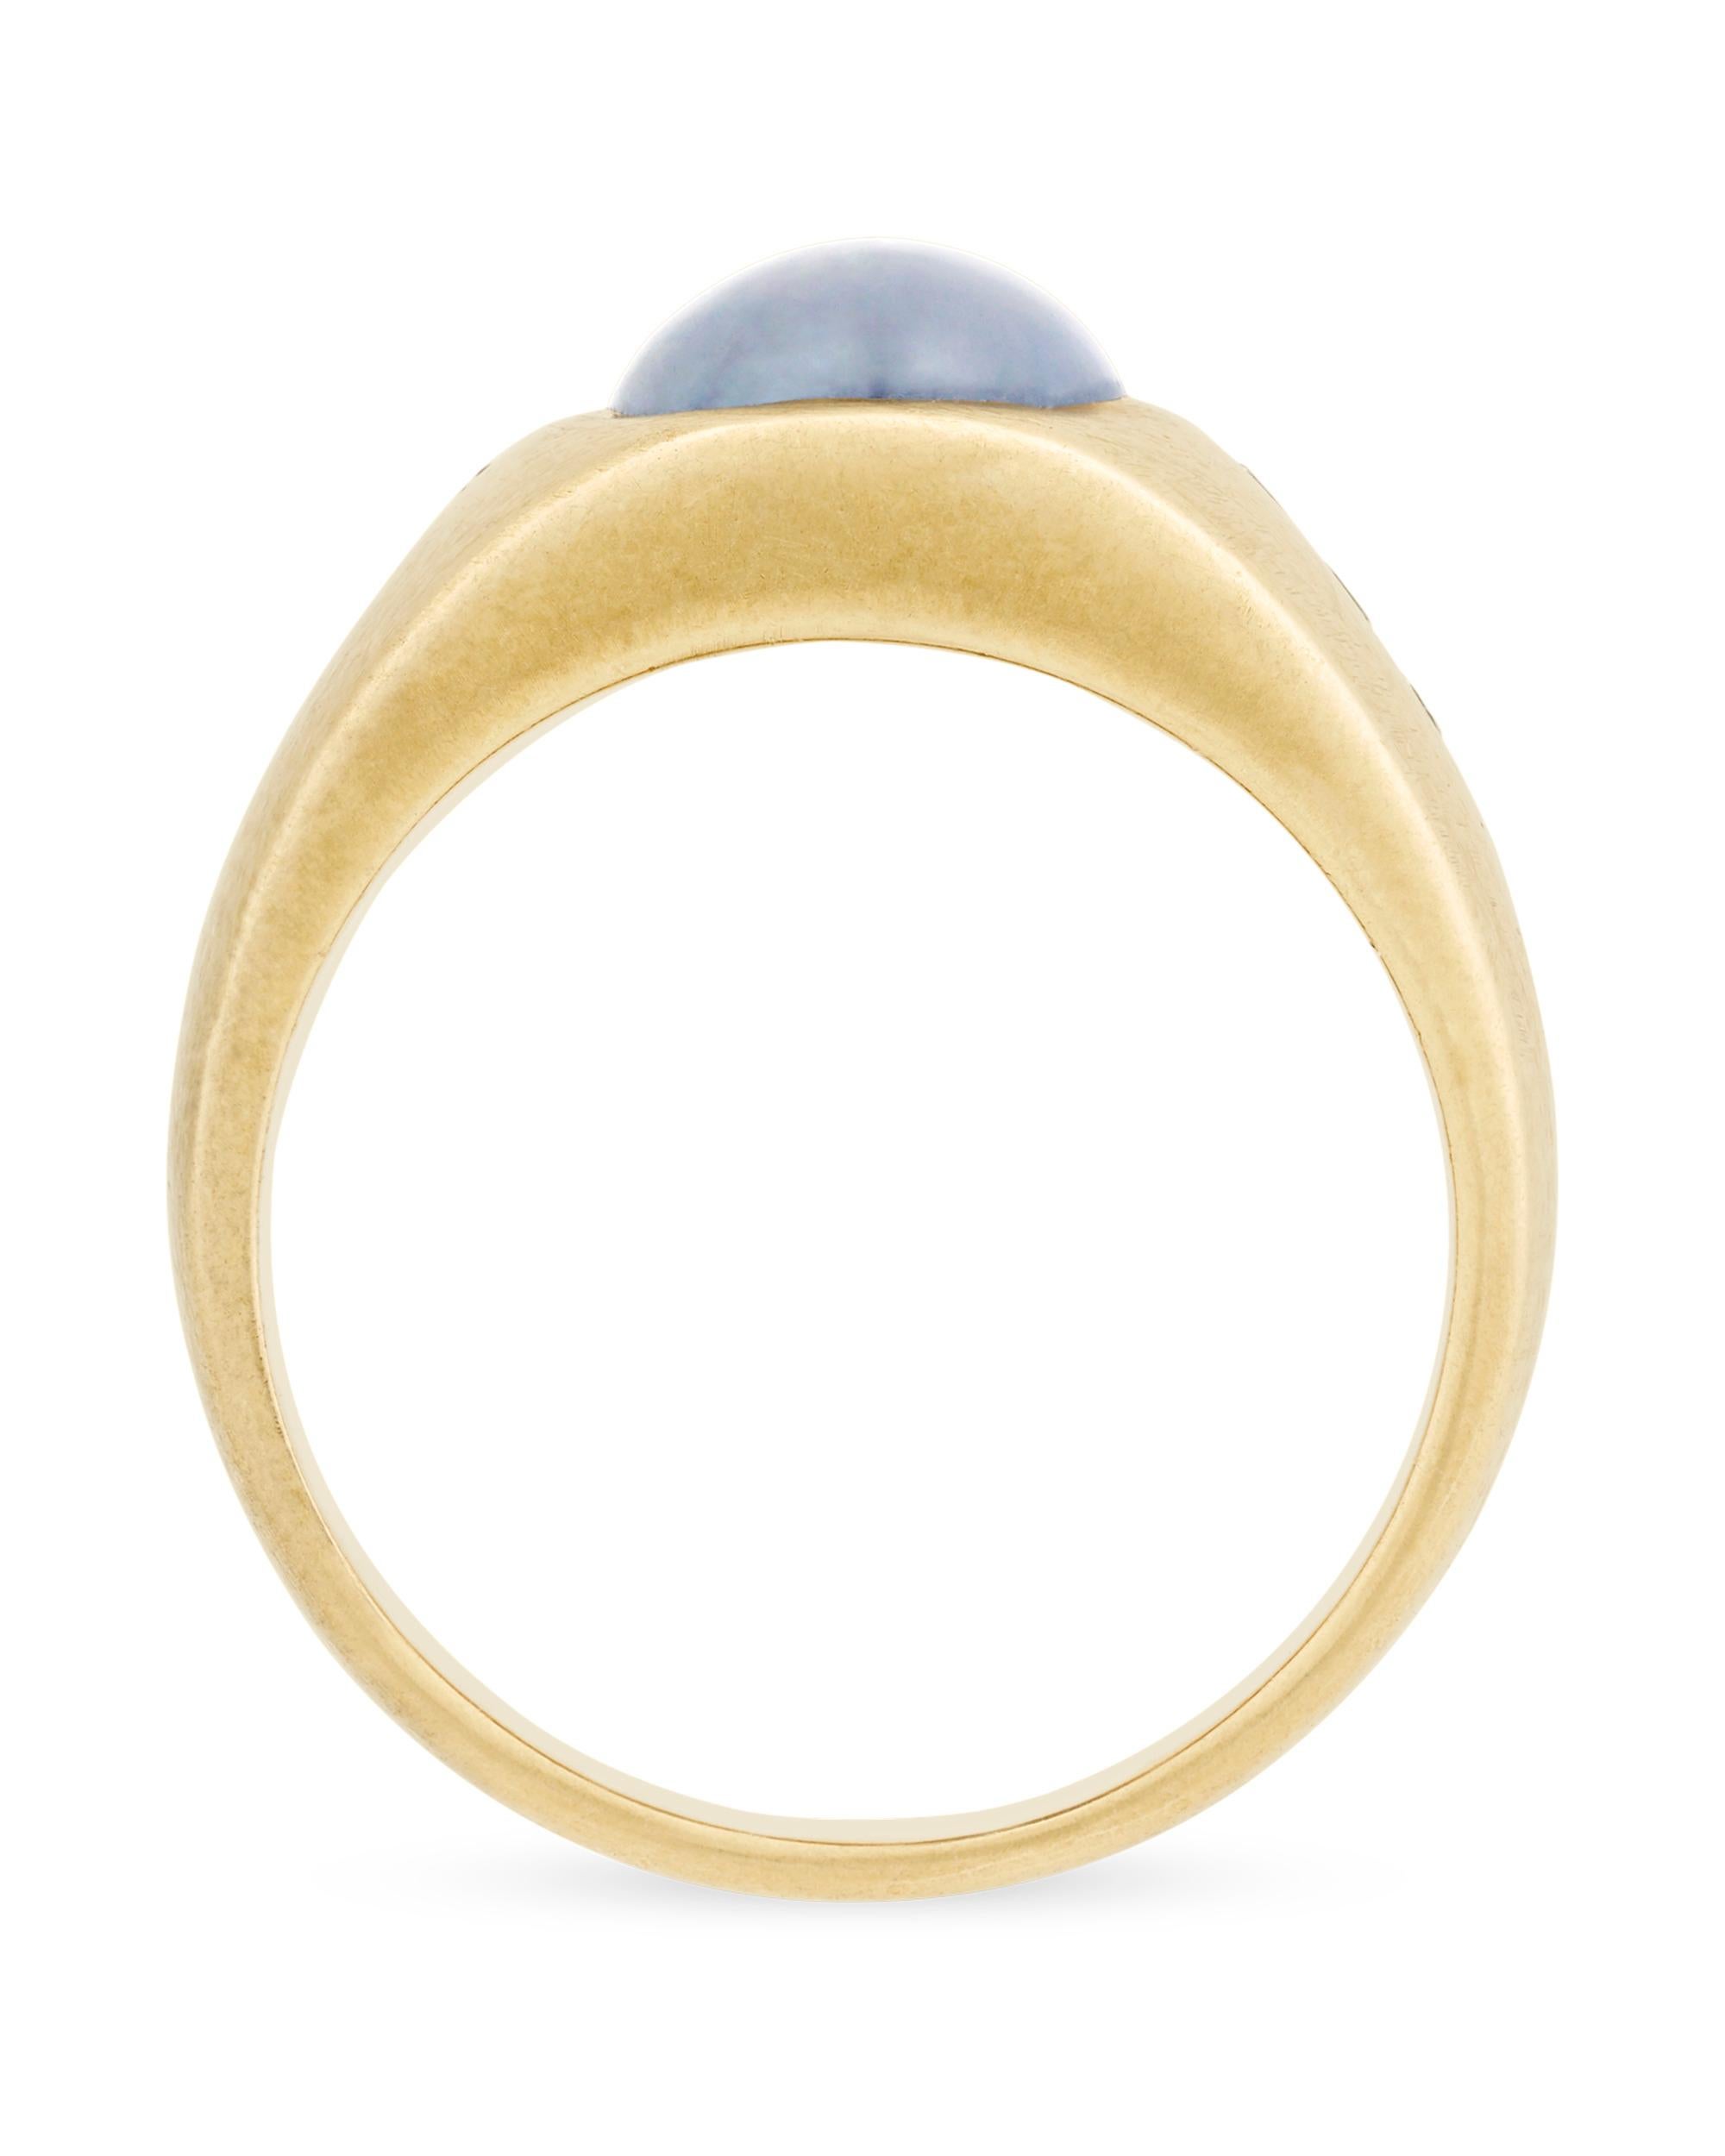 An amazing star sapphire displays its radiant star in this handsome men's ring. White diamonds provide the perfect accompanyment to this wondrous stone it its 14K yellow gold setting. The star sapphire’s trademark six-pointed star is the result of a